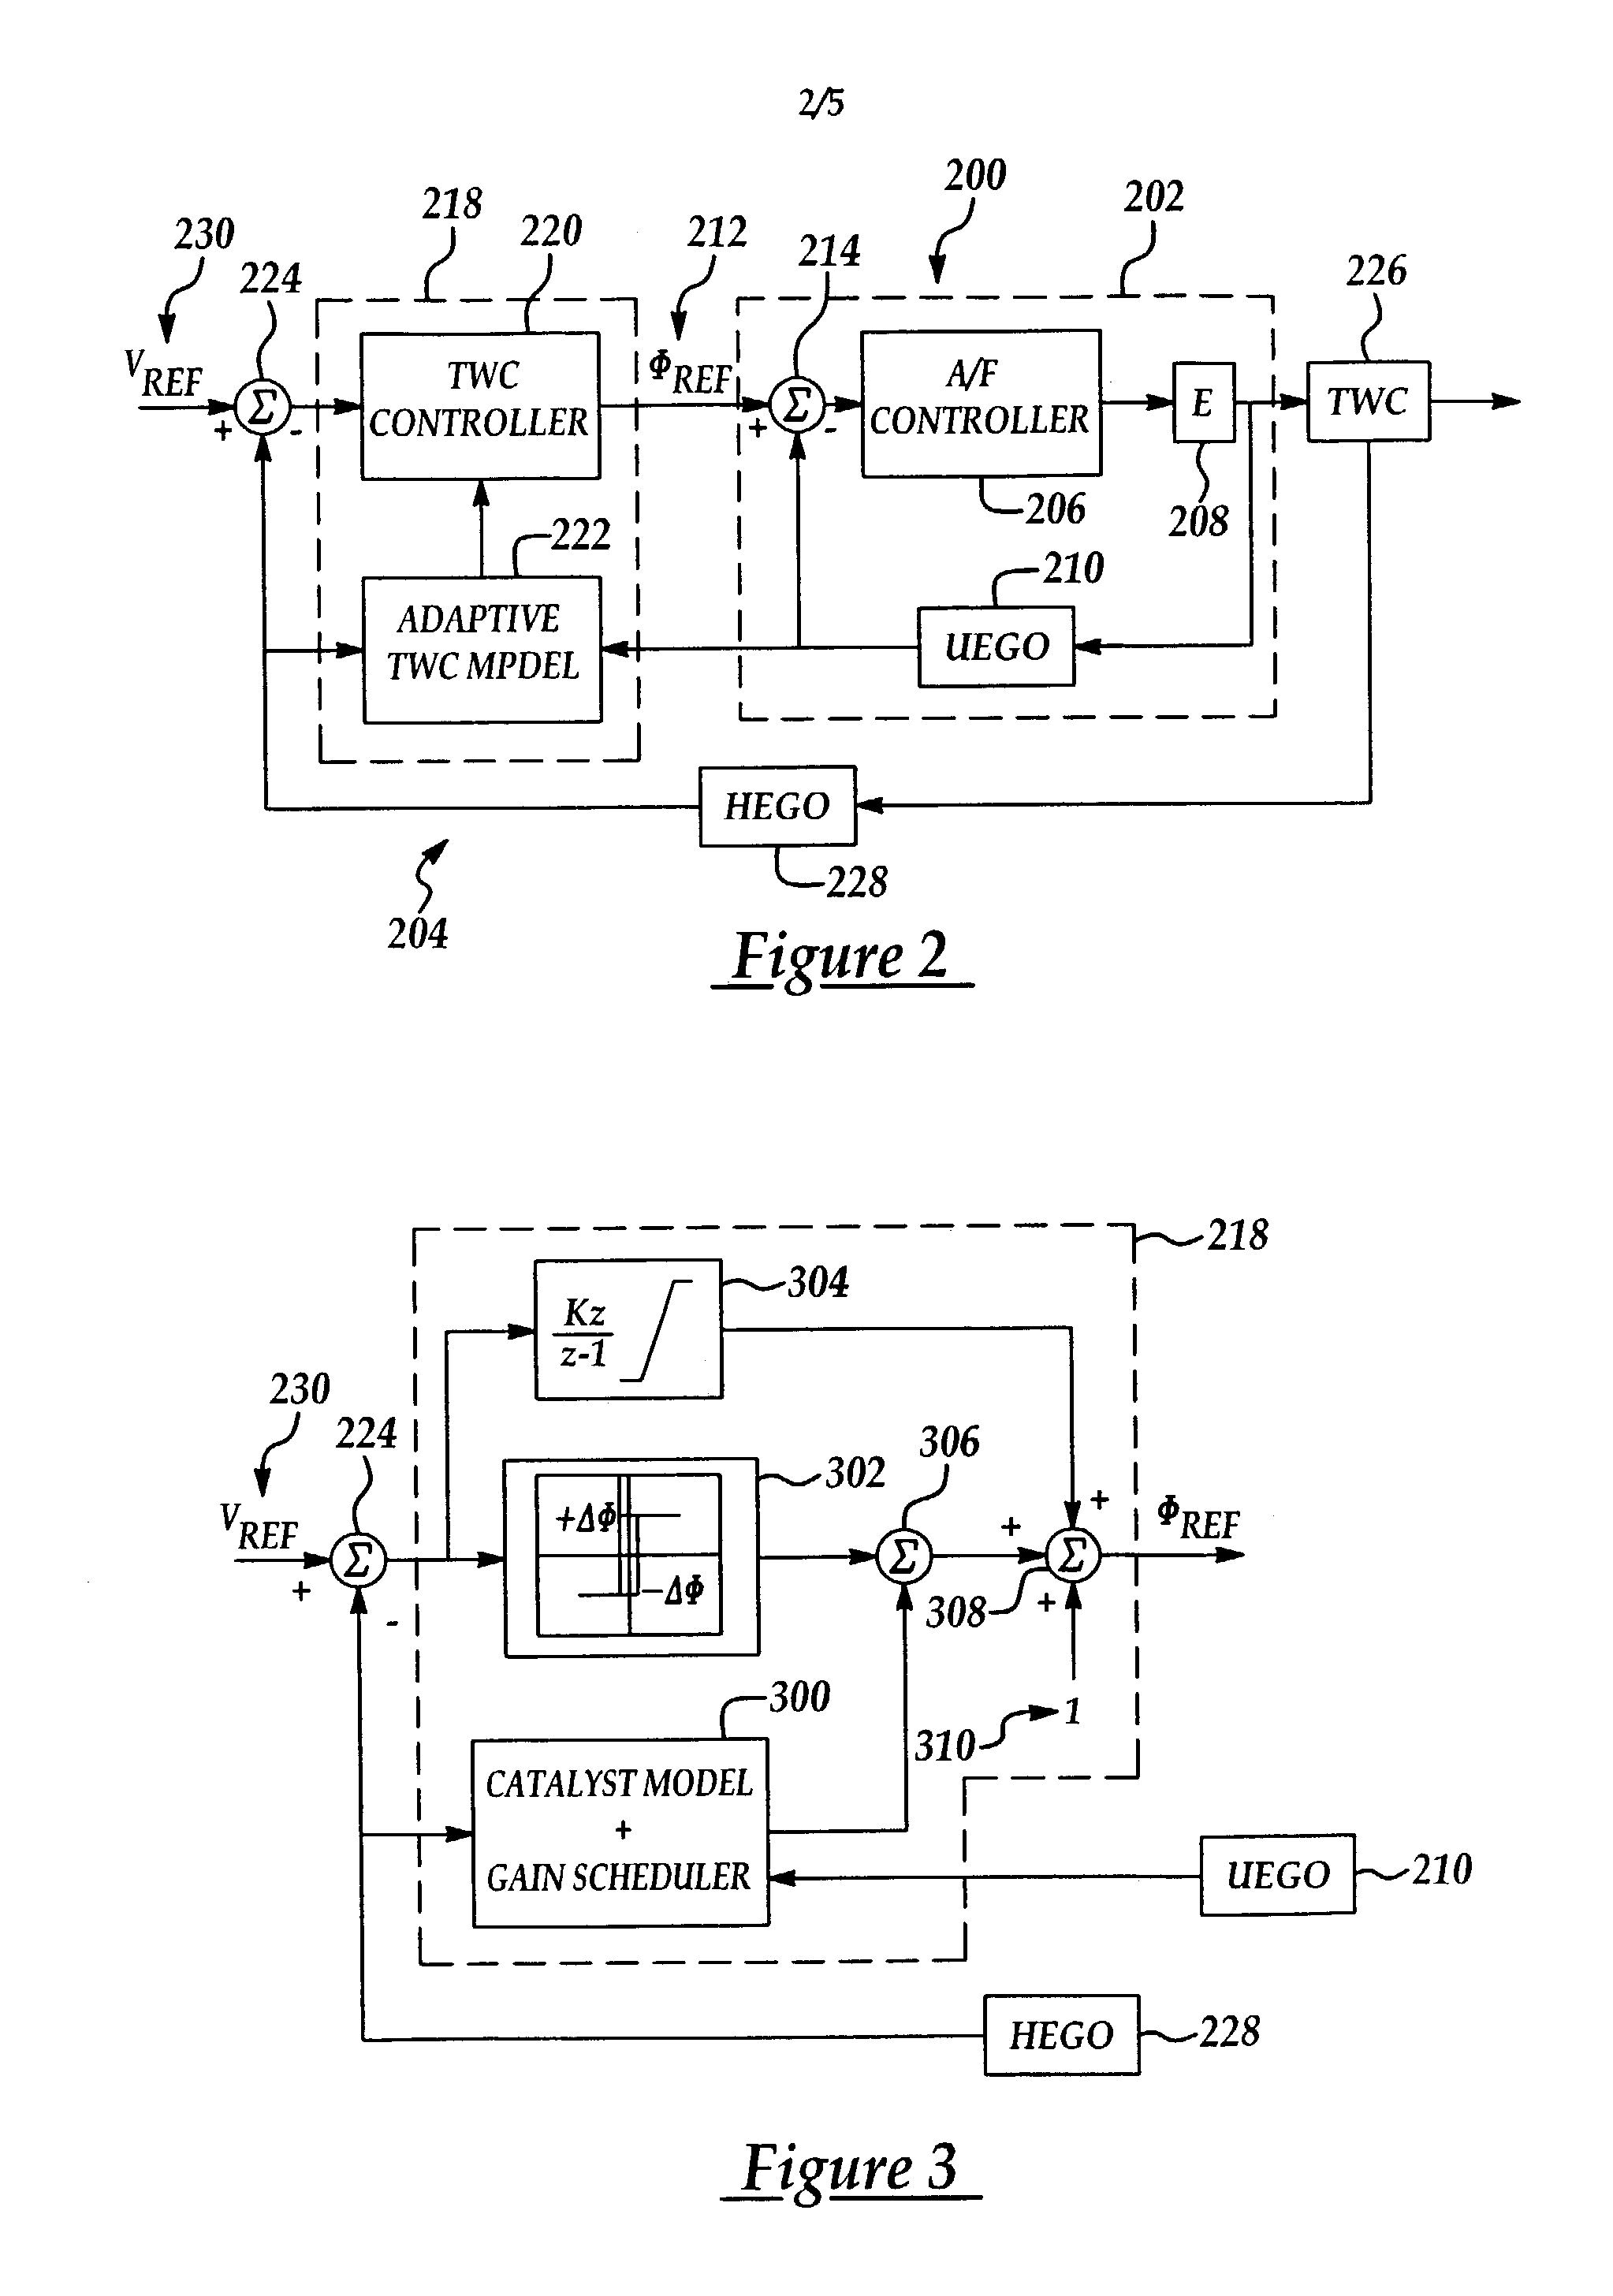 Fuel/air ratio feedback control with catalyst gain estimation for an internal combustion engine